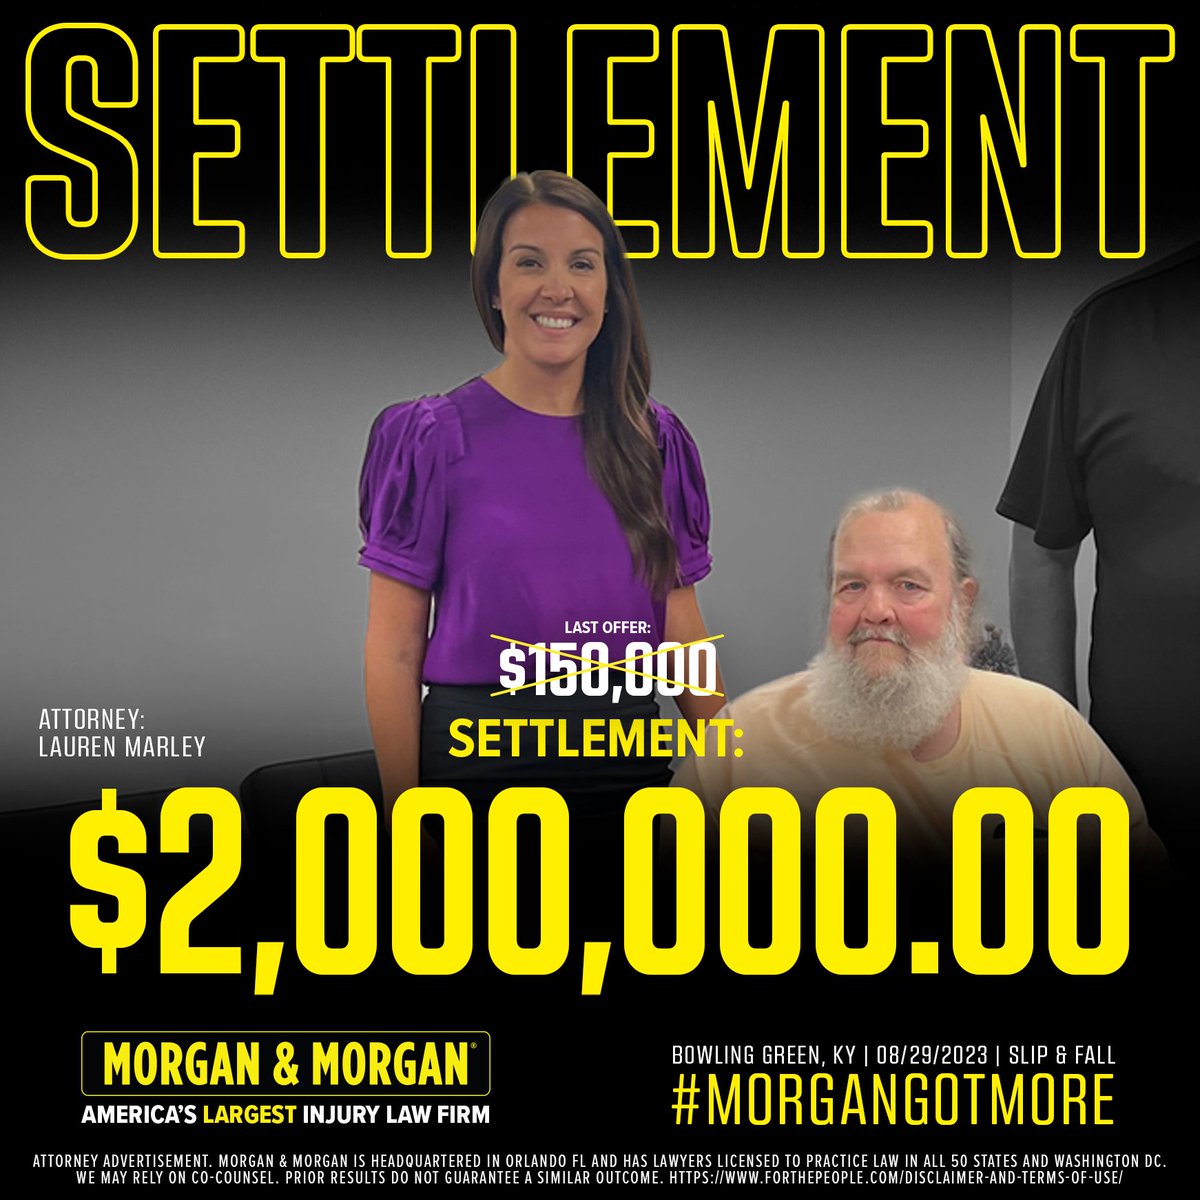 🚨 #VerdictAlert:

Congratulations to Lauren Marley for receiving a $2,000,000.00 settlement for our client in Bowling Green, KY!

Proud of our attorney for fighting to secure every penny our client deserved 💪 #ForThePeople

#MorganGotMore #MorganMath #LAW